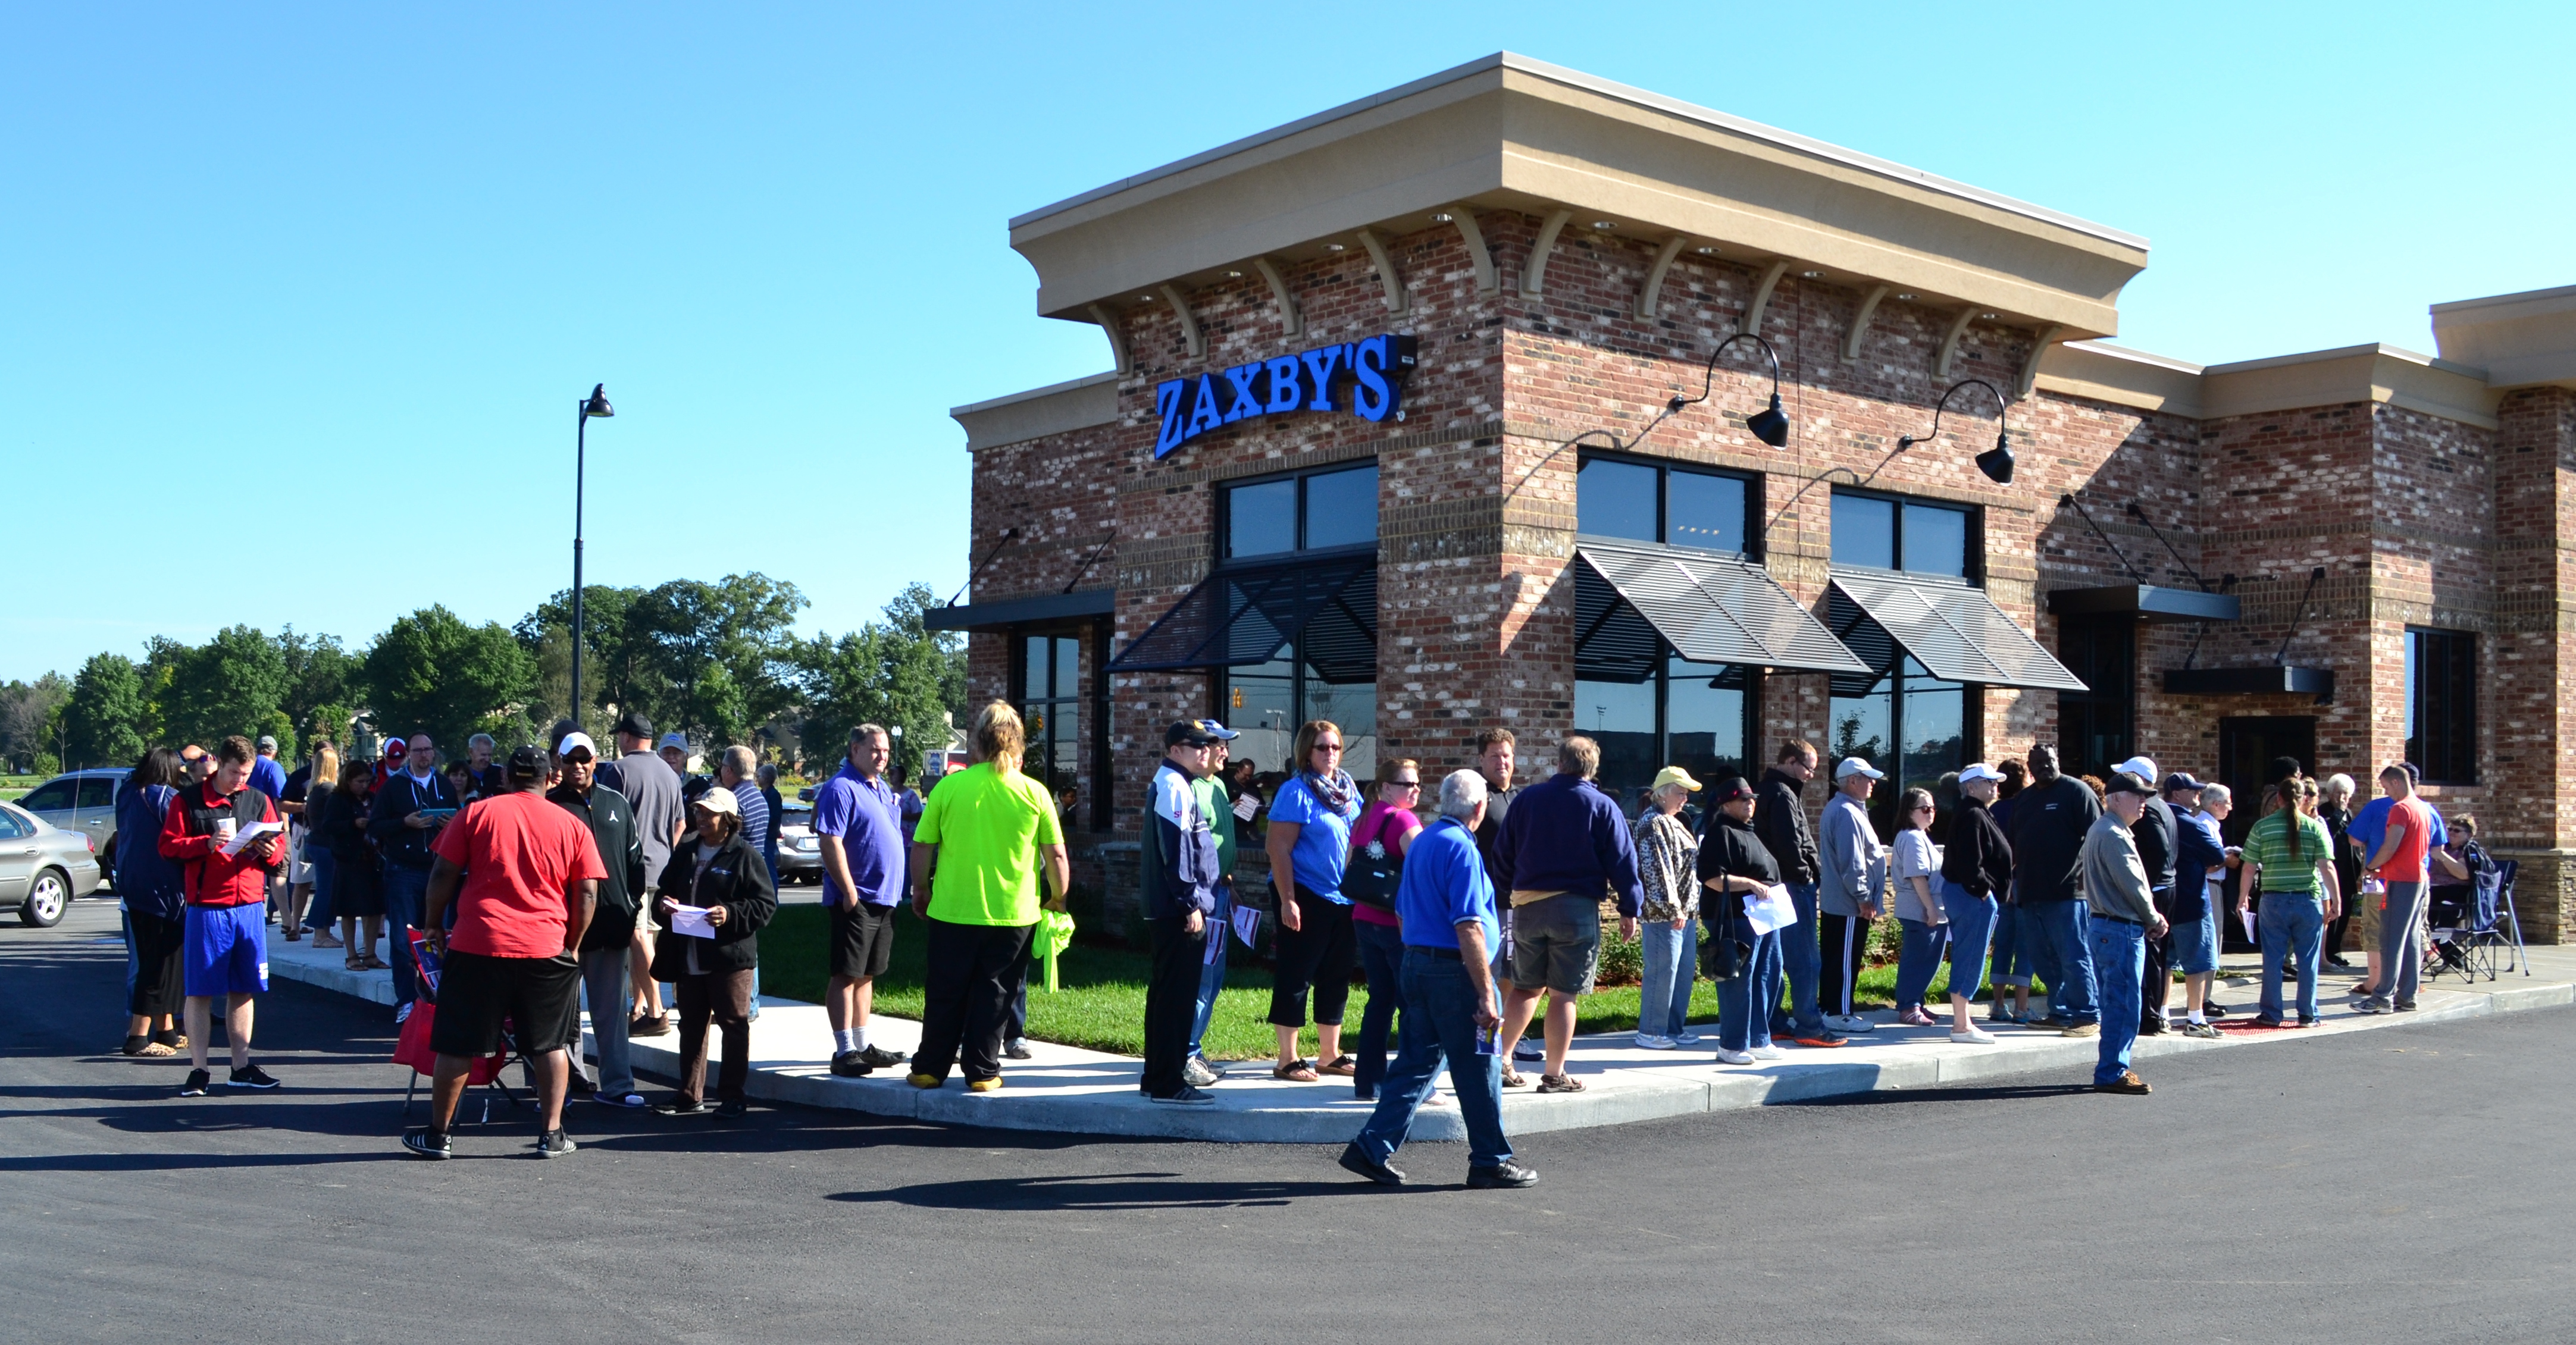 A crowd gathered outside Zaxby’s at Fishers Marketplace Sept. 8 for the grand opening and an offer of free meals for a year for the first 100 customers. (Photo by John Cinnamon)